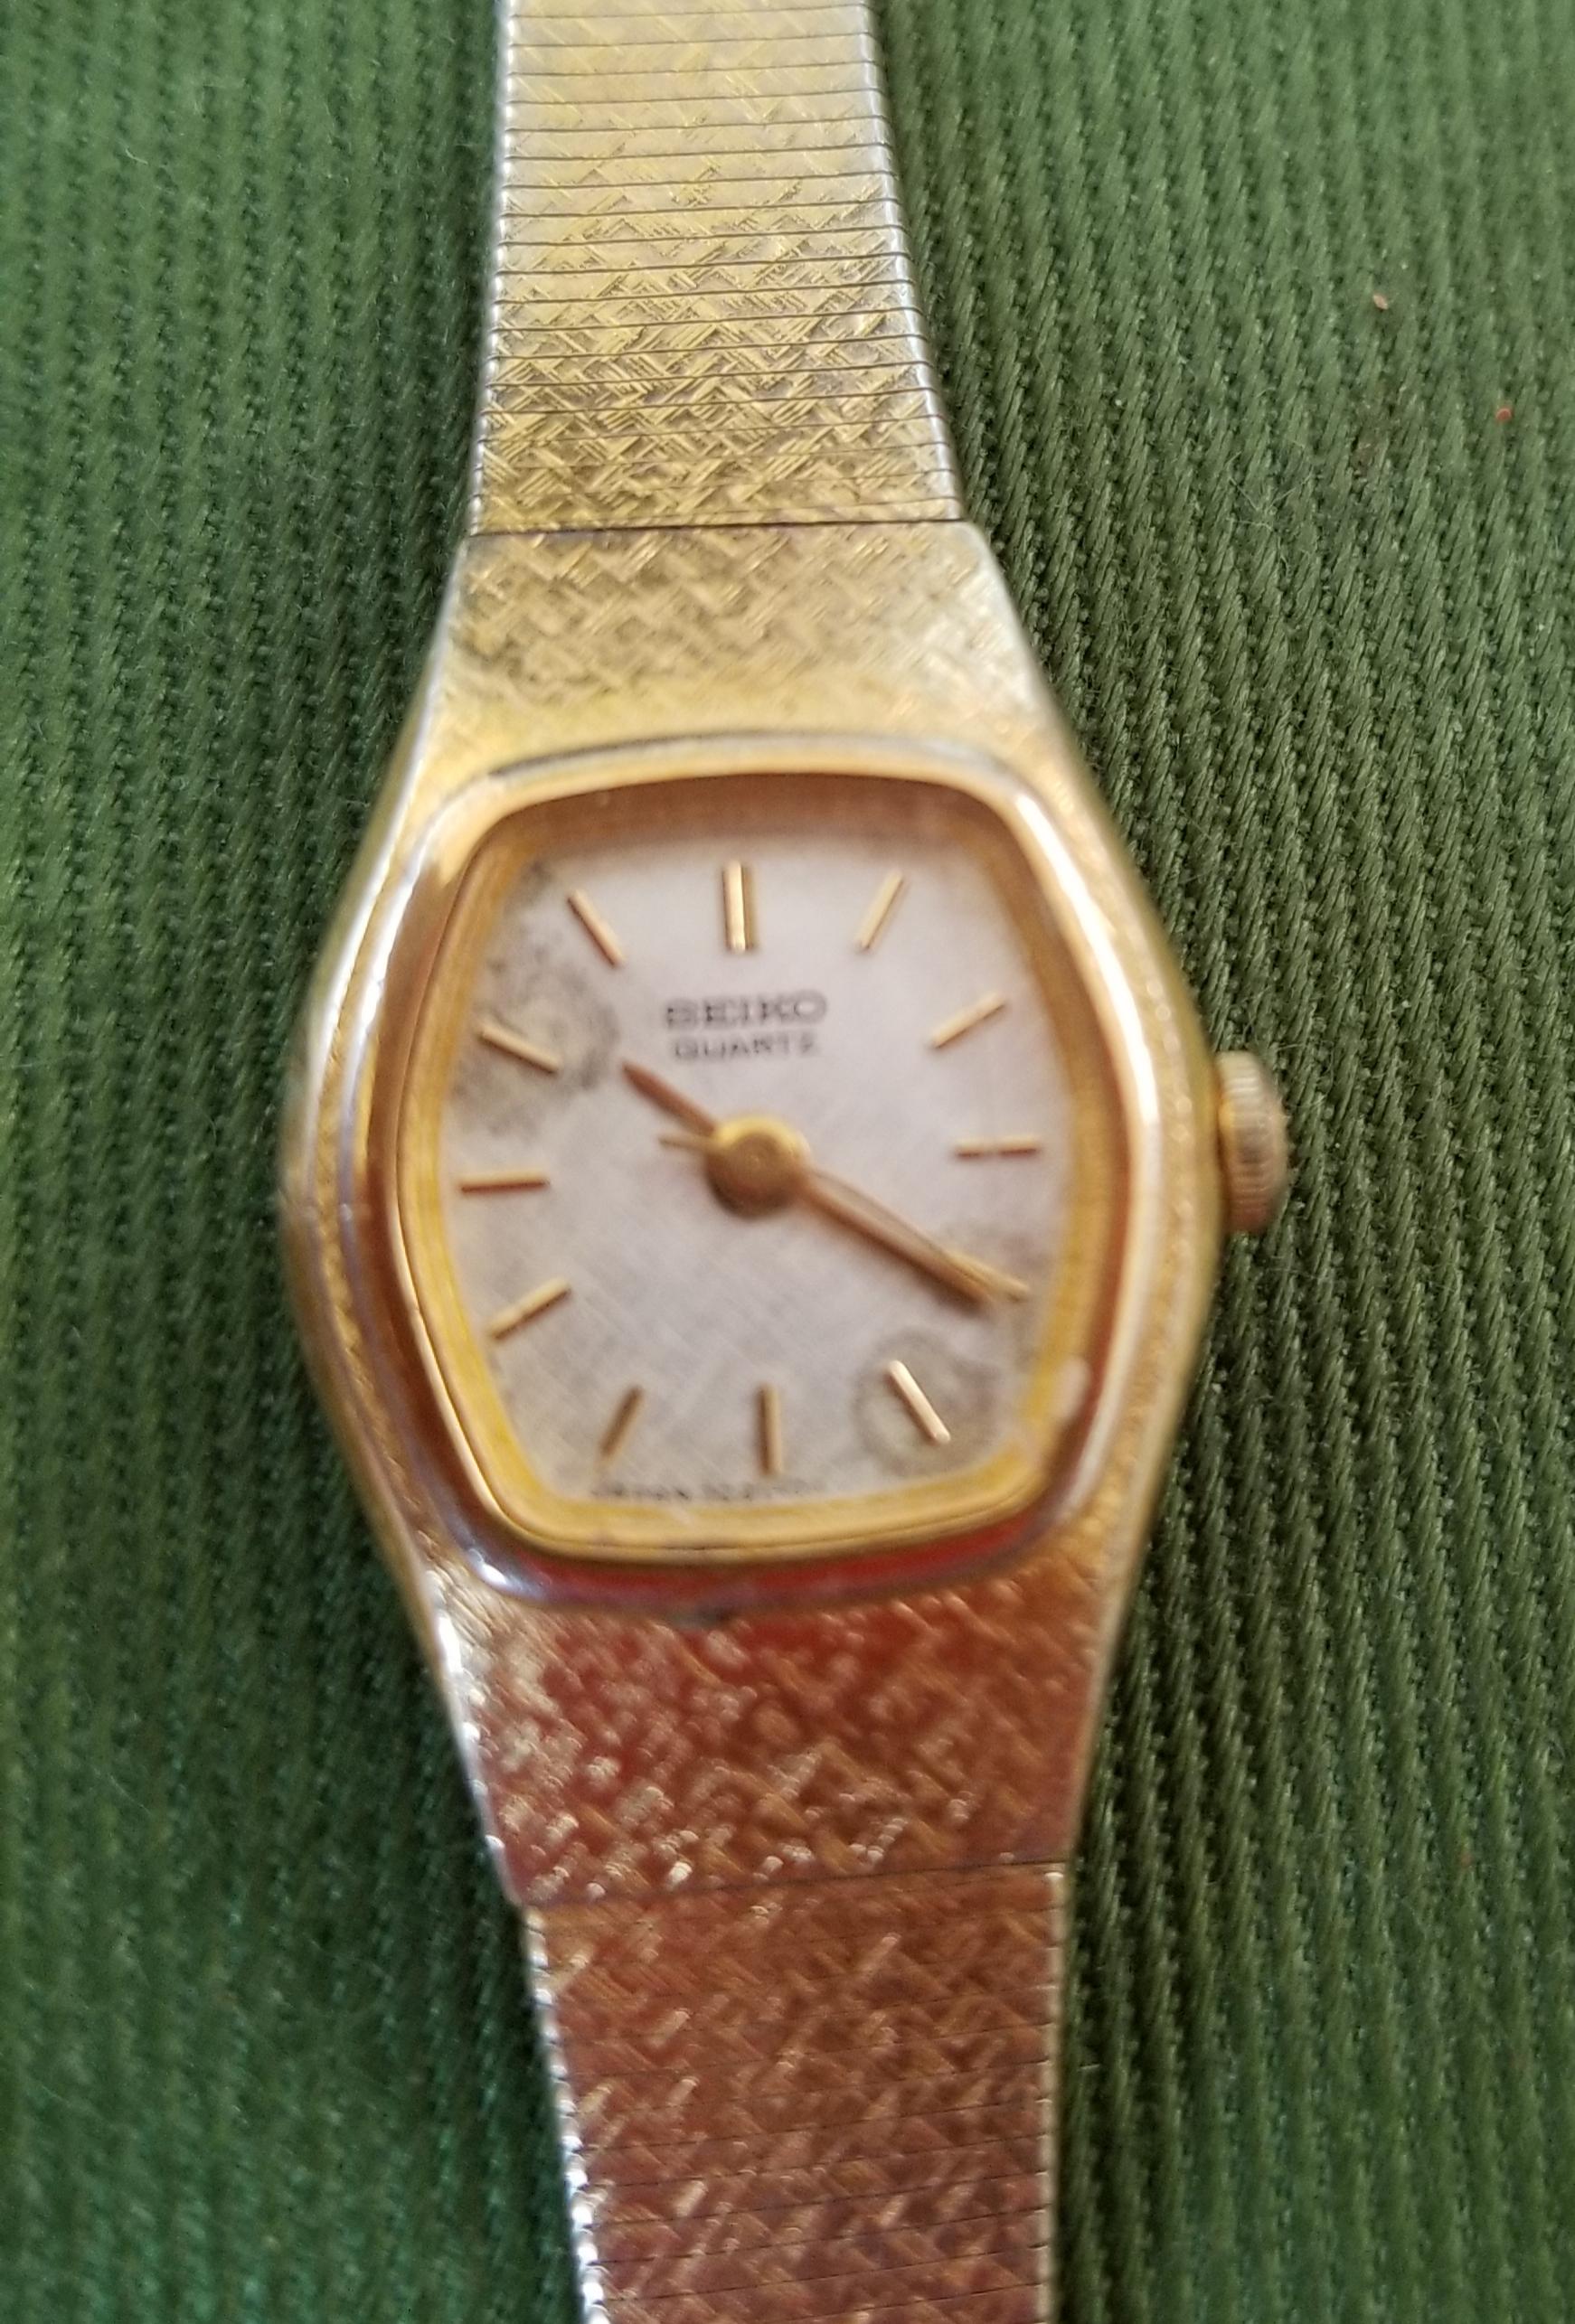 Ladies vintage Seiko watch - Chat About Watches & The Industry Here ...